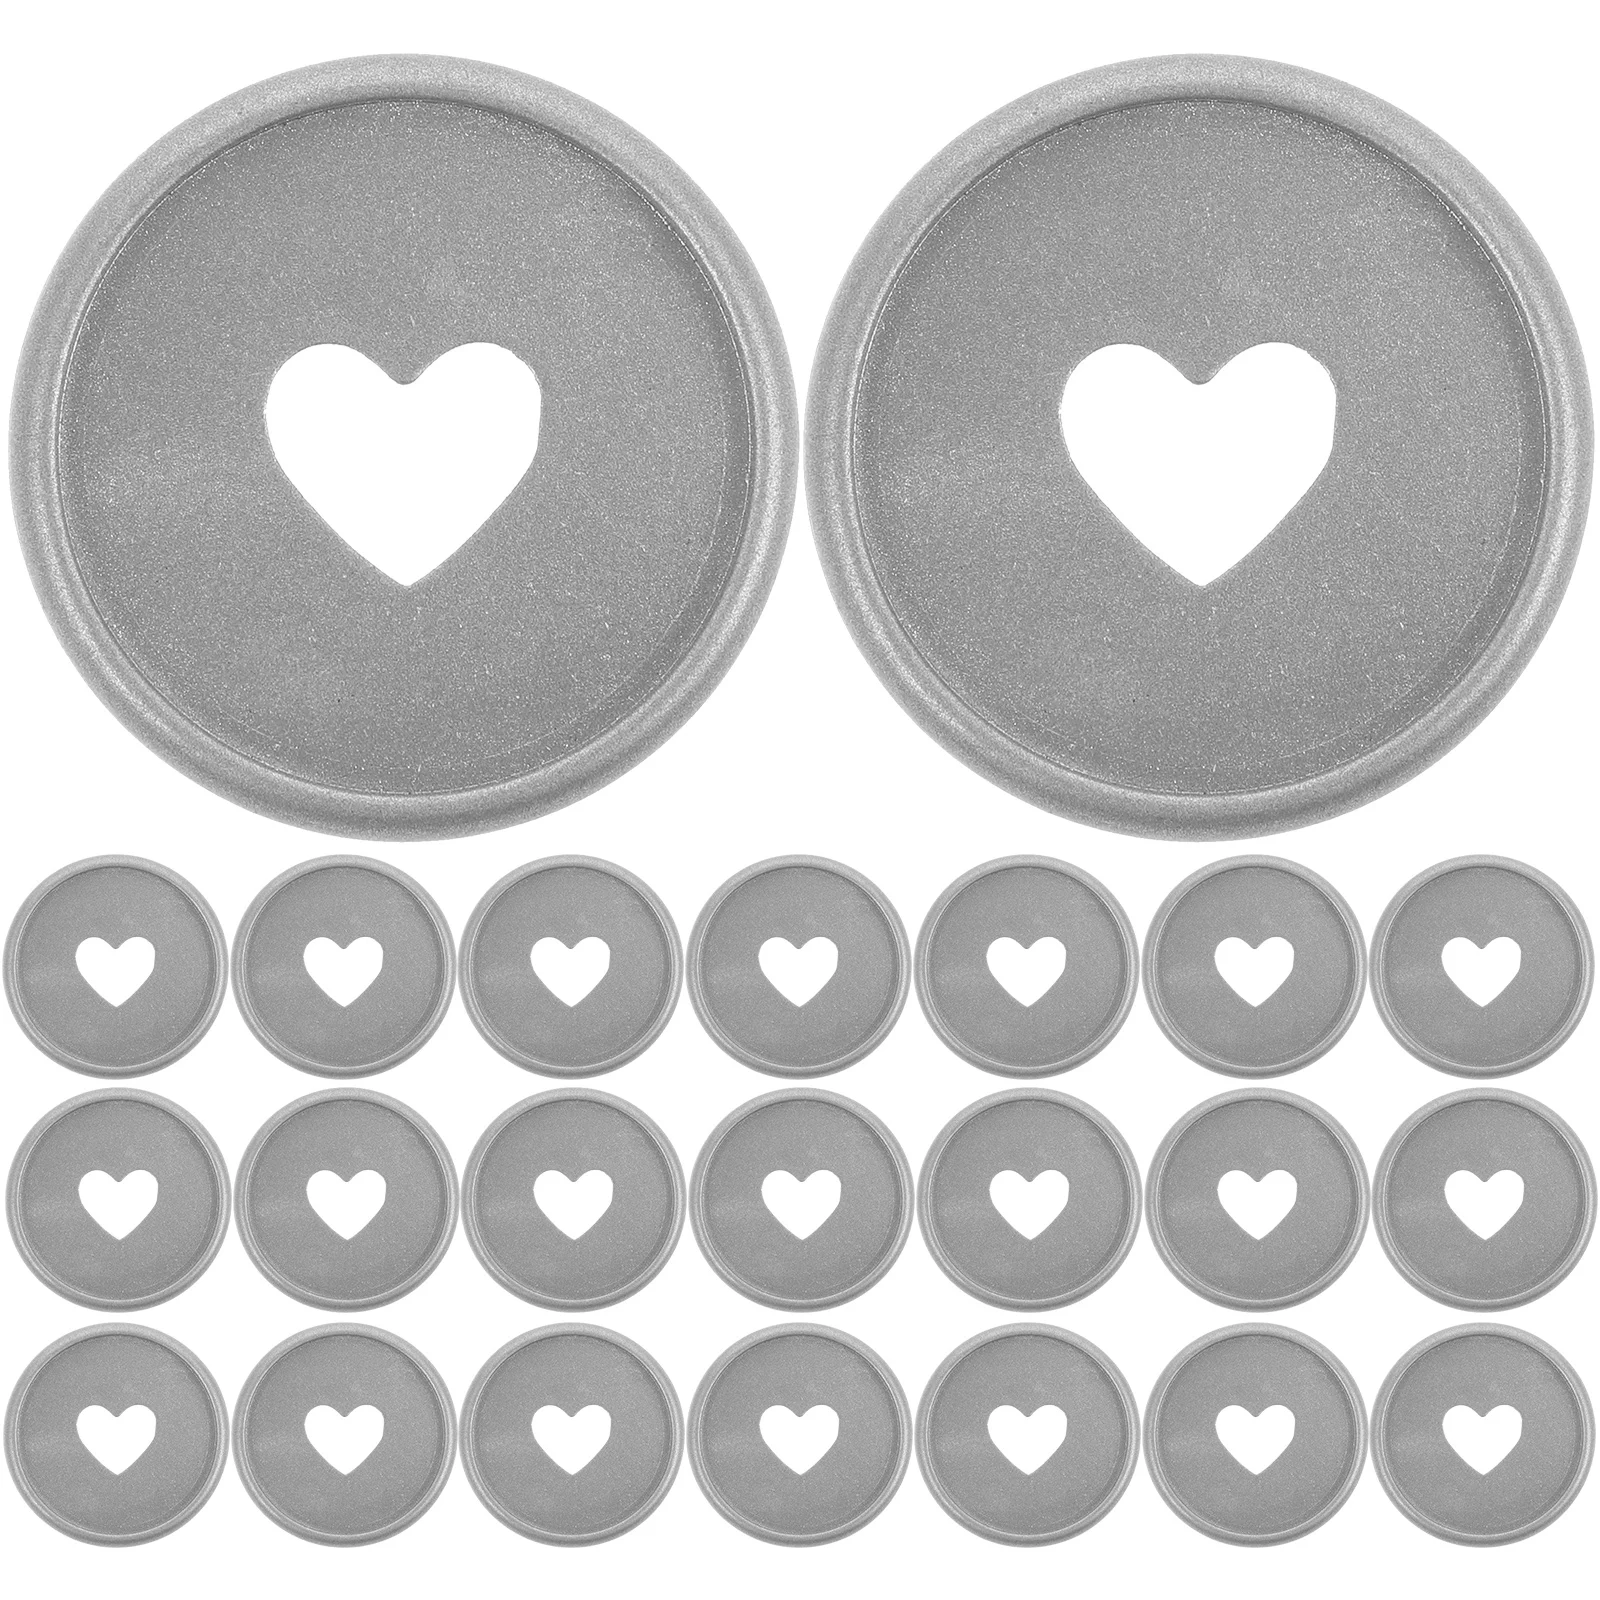 

24 Pcs Heart Binding Buckle Binder Discs Clips Small Planner Tools Book Love Diary Abs Notebook